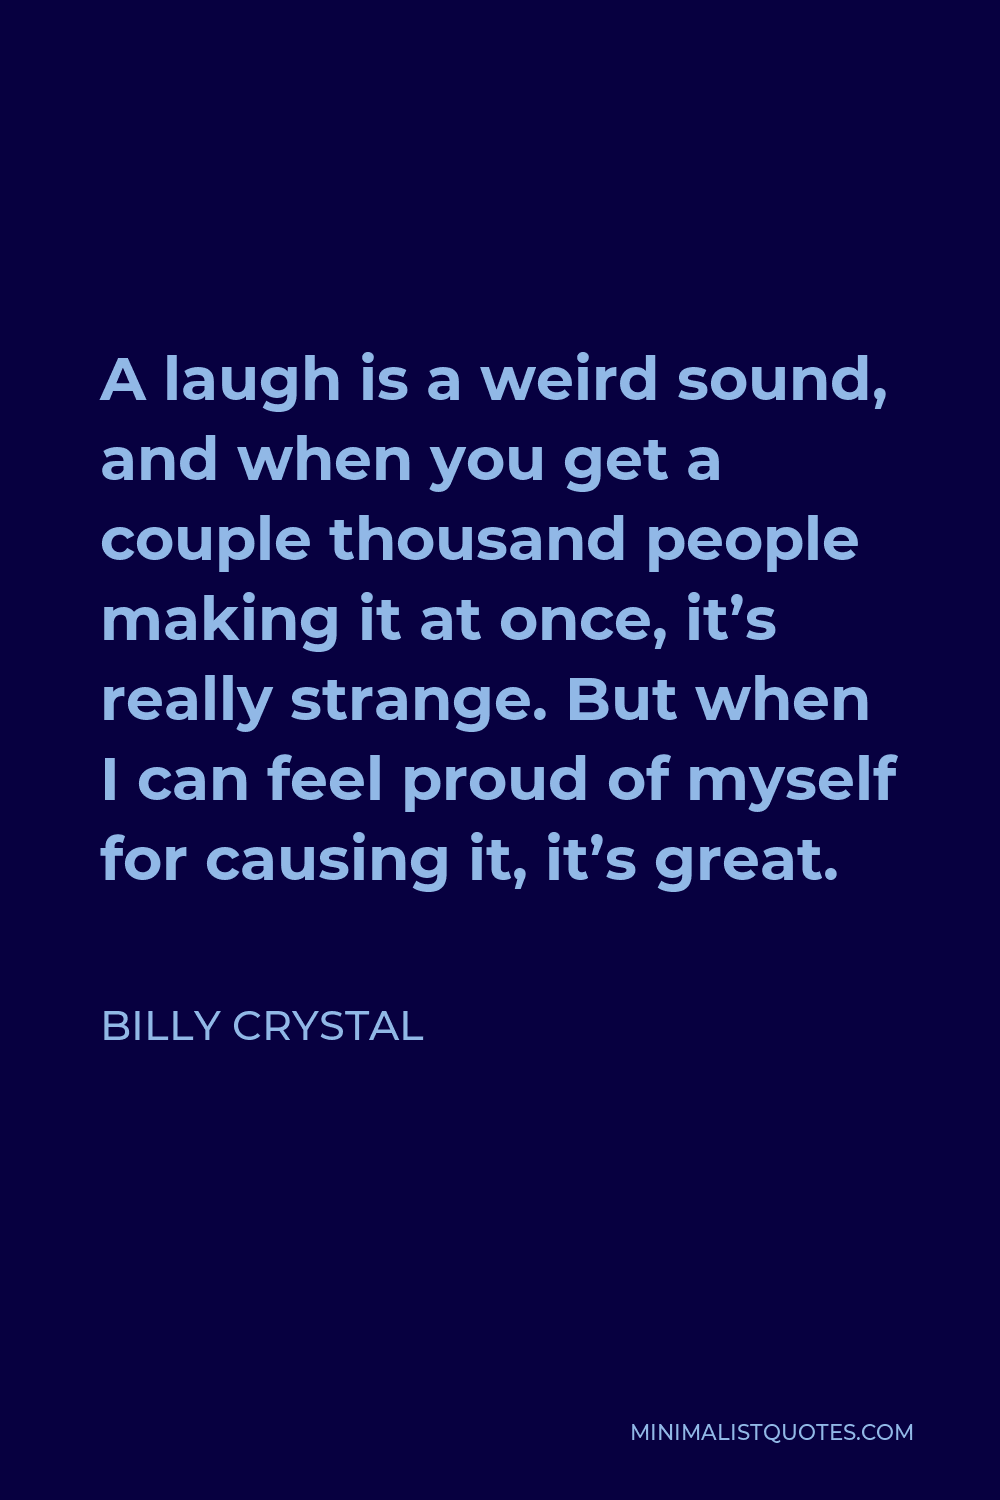 Billy Crystal Quote - A laugh is a weird sound, and when you get a couple thousand people making it at once, it’s really strange. But when I can feel proud of myself for causing it, it’s great.